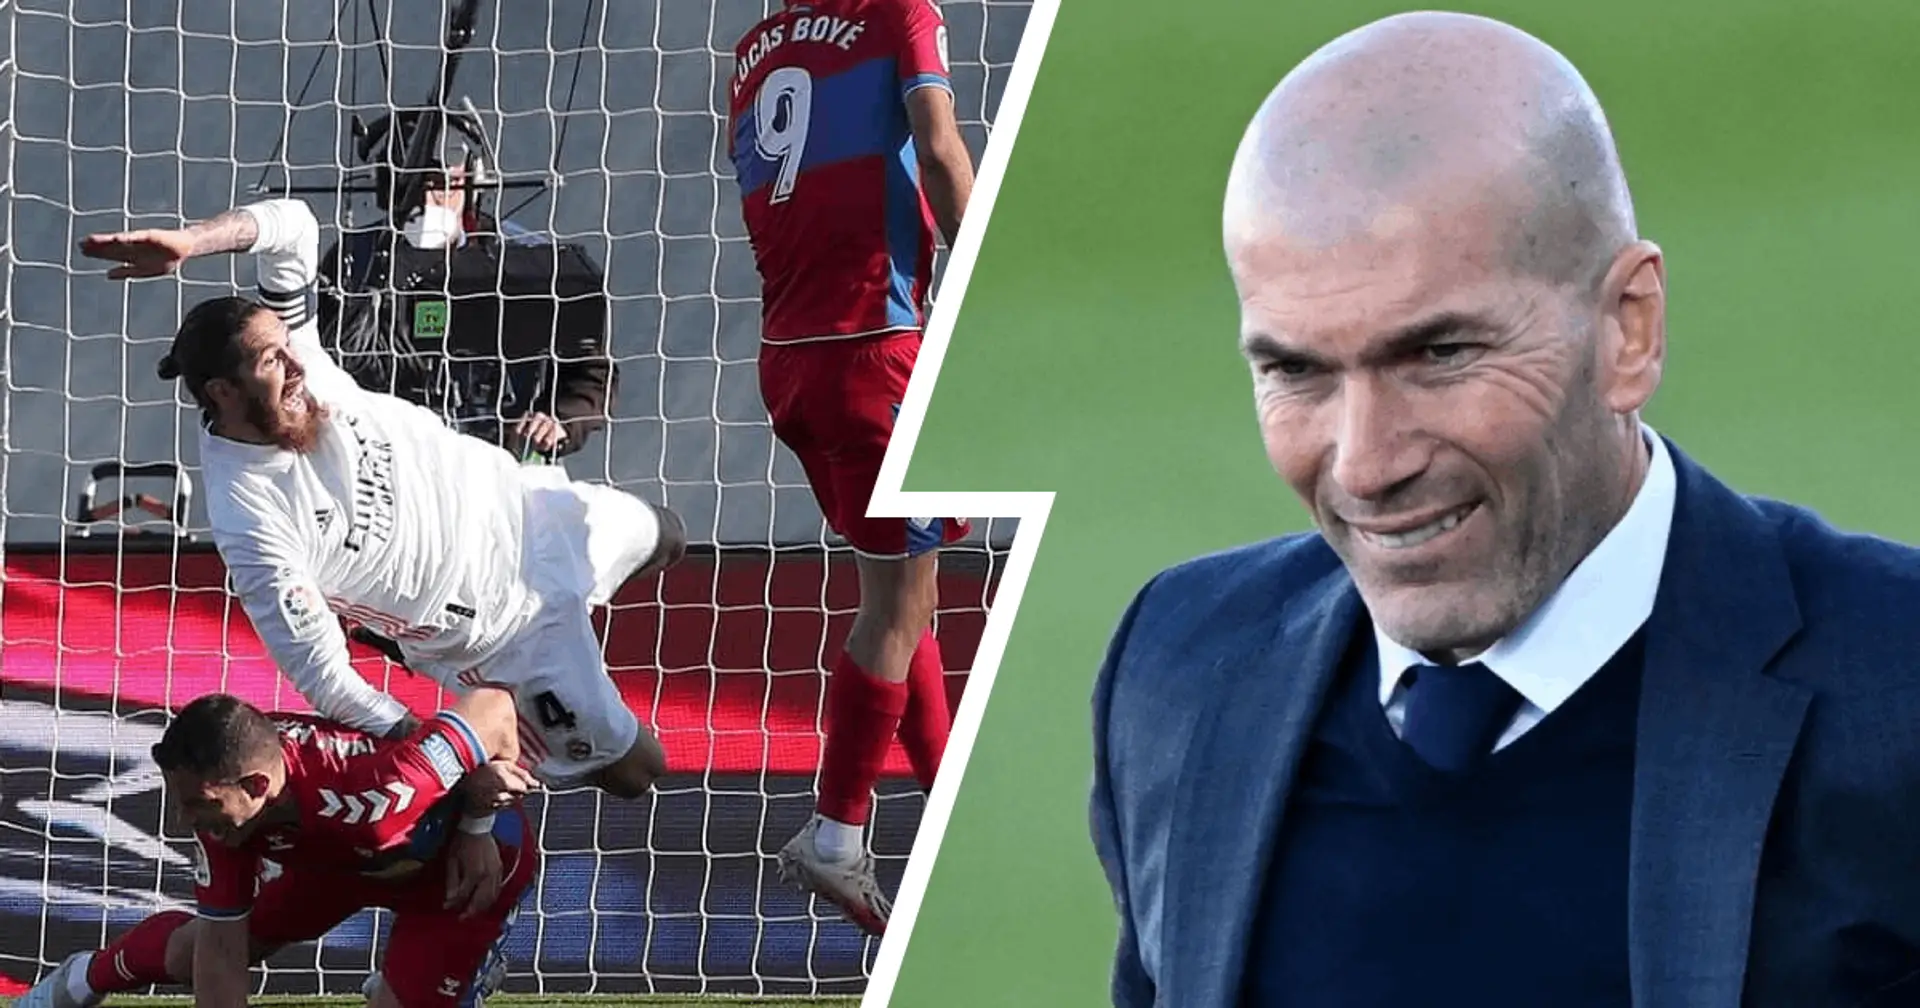 'That's an issue I don't get involved in': Zinedine Zidane reluctant to discuss penalty decisions